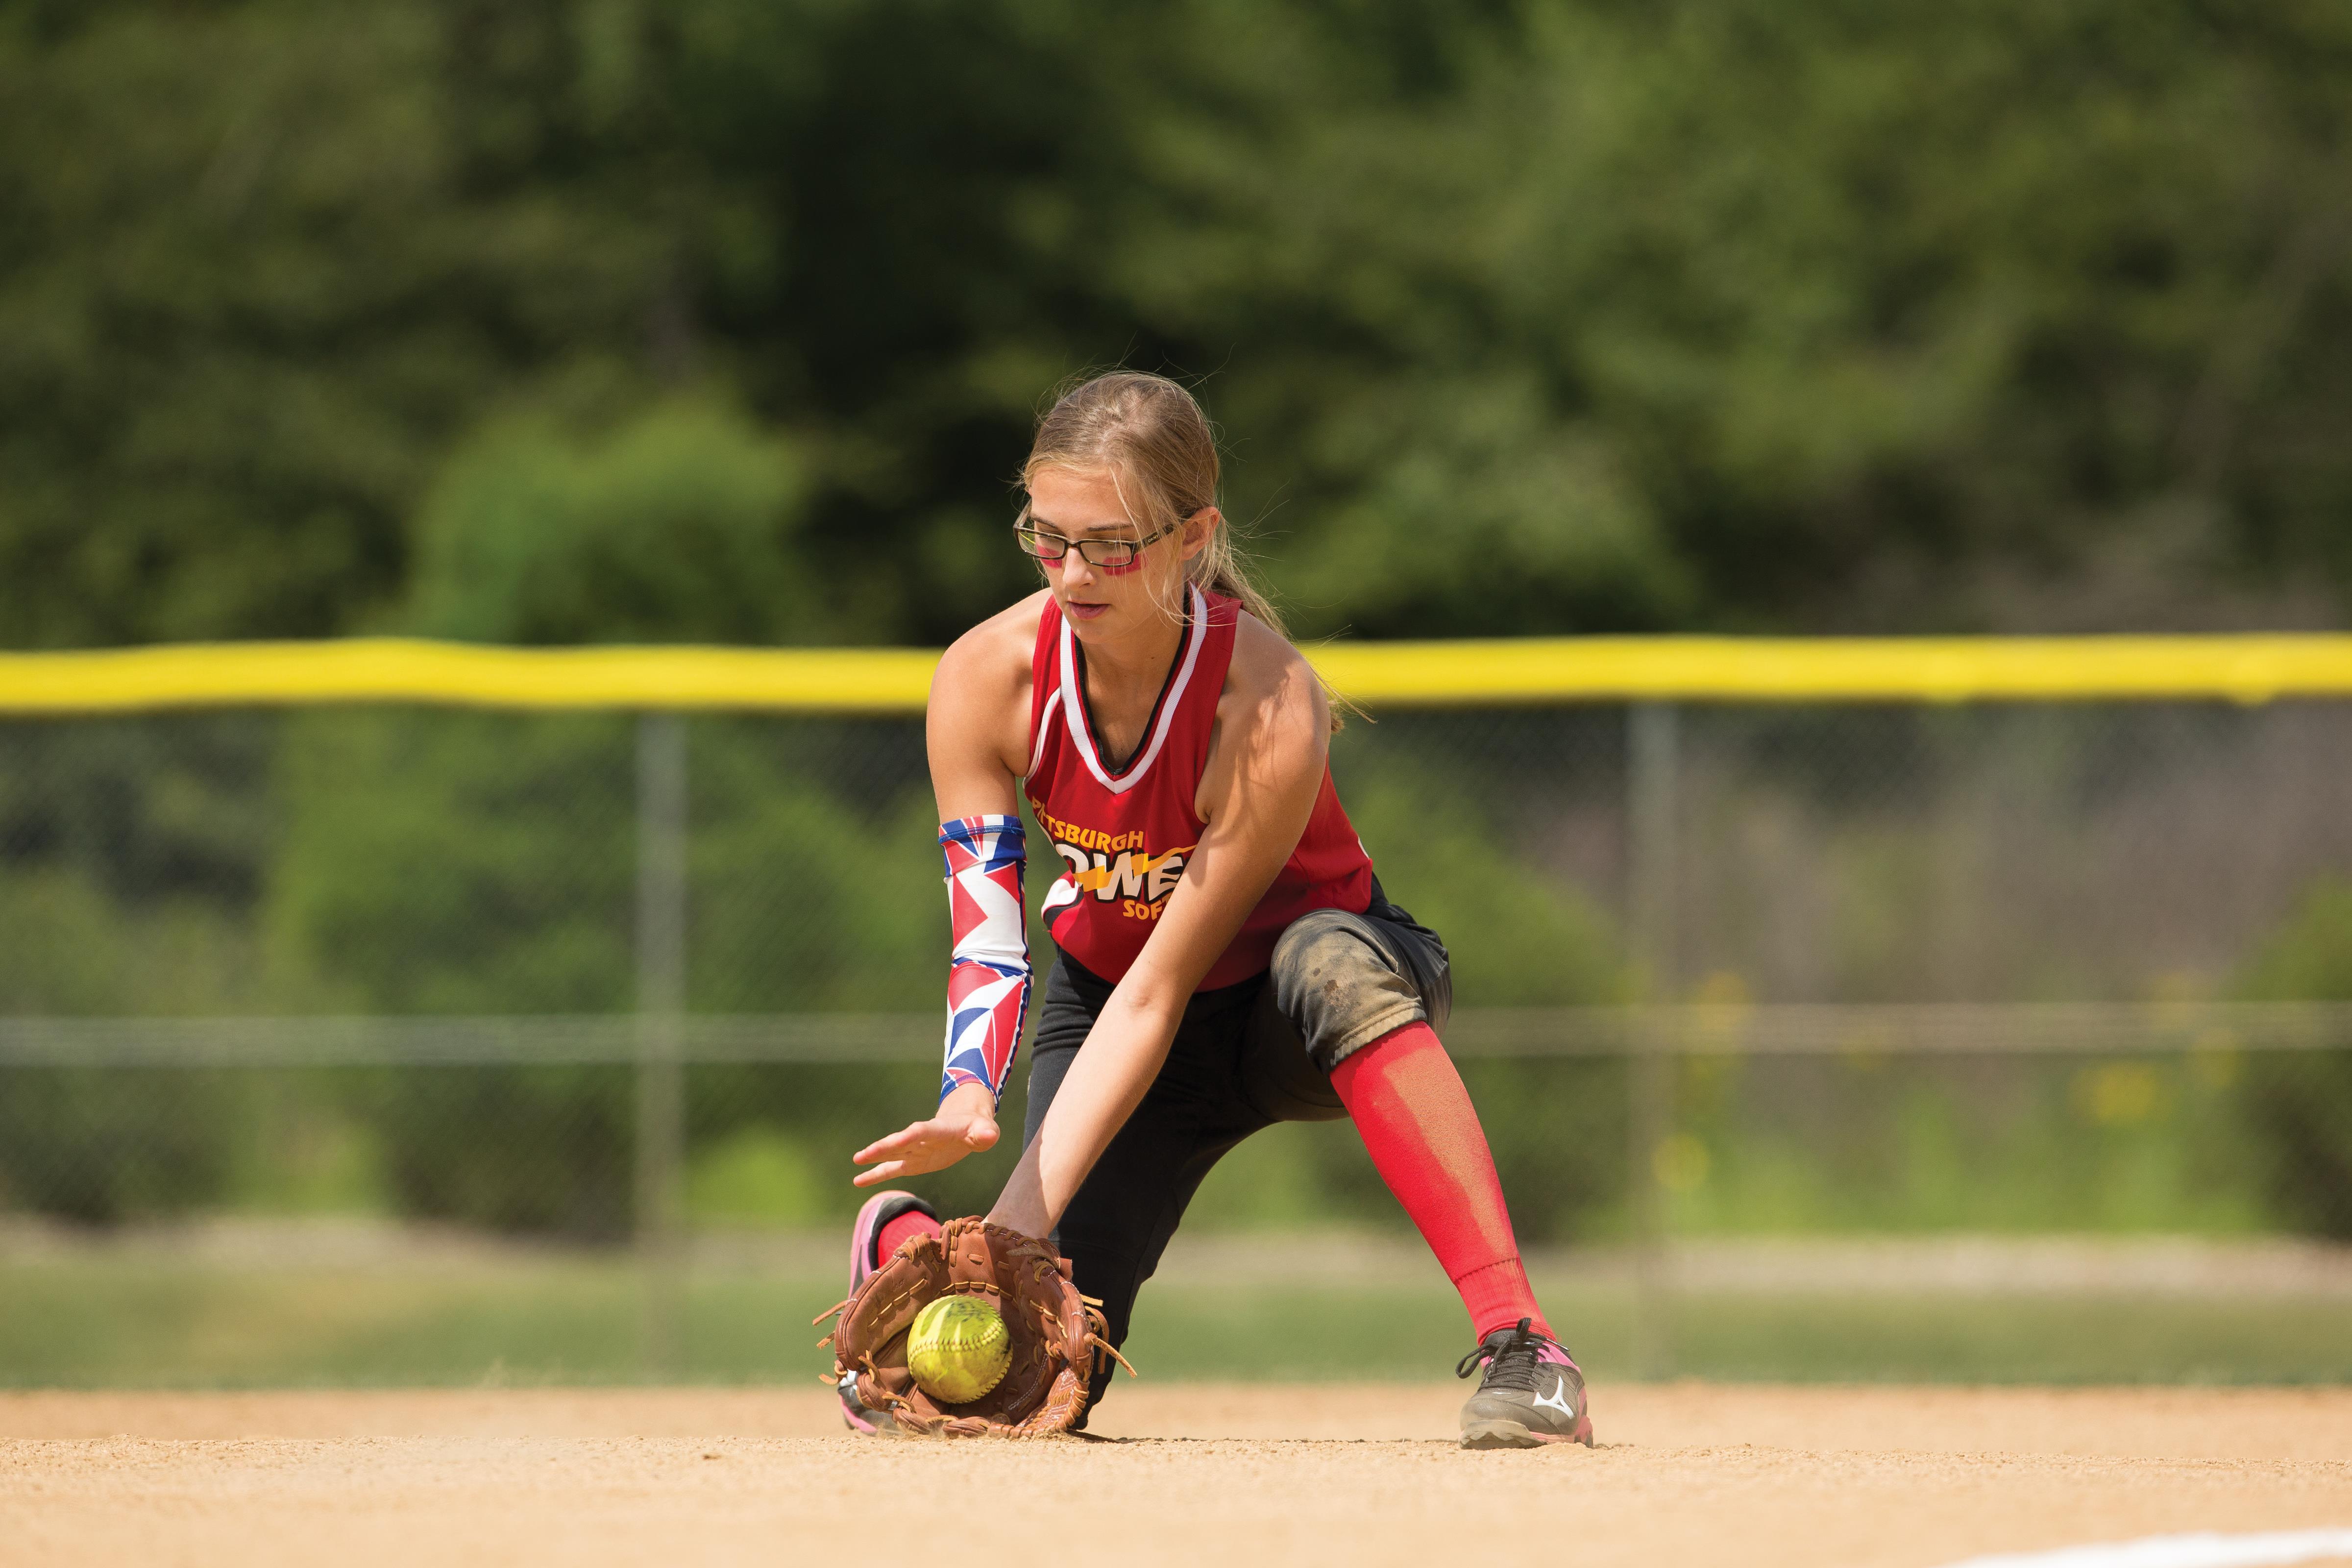 softball-infielder-tips-how-to-position-yourself-to-receive-the-ball-pro-tips-by-dick-s